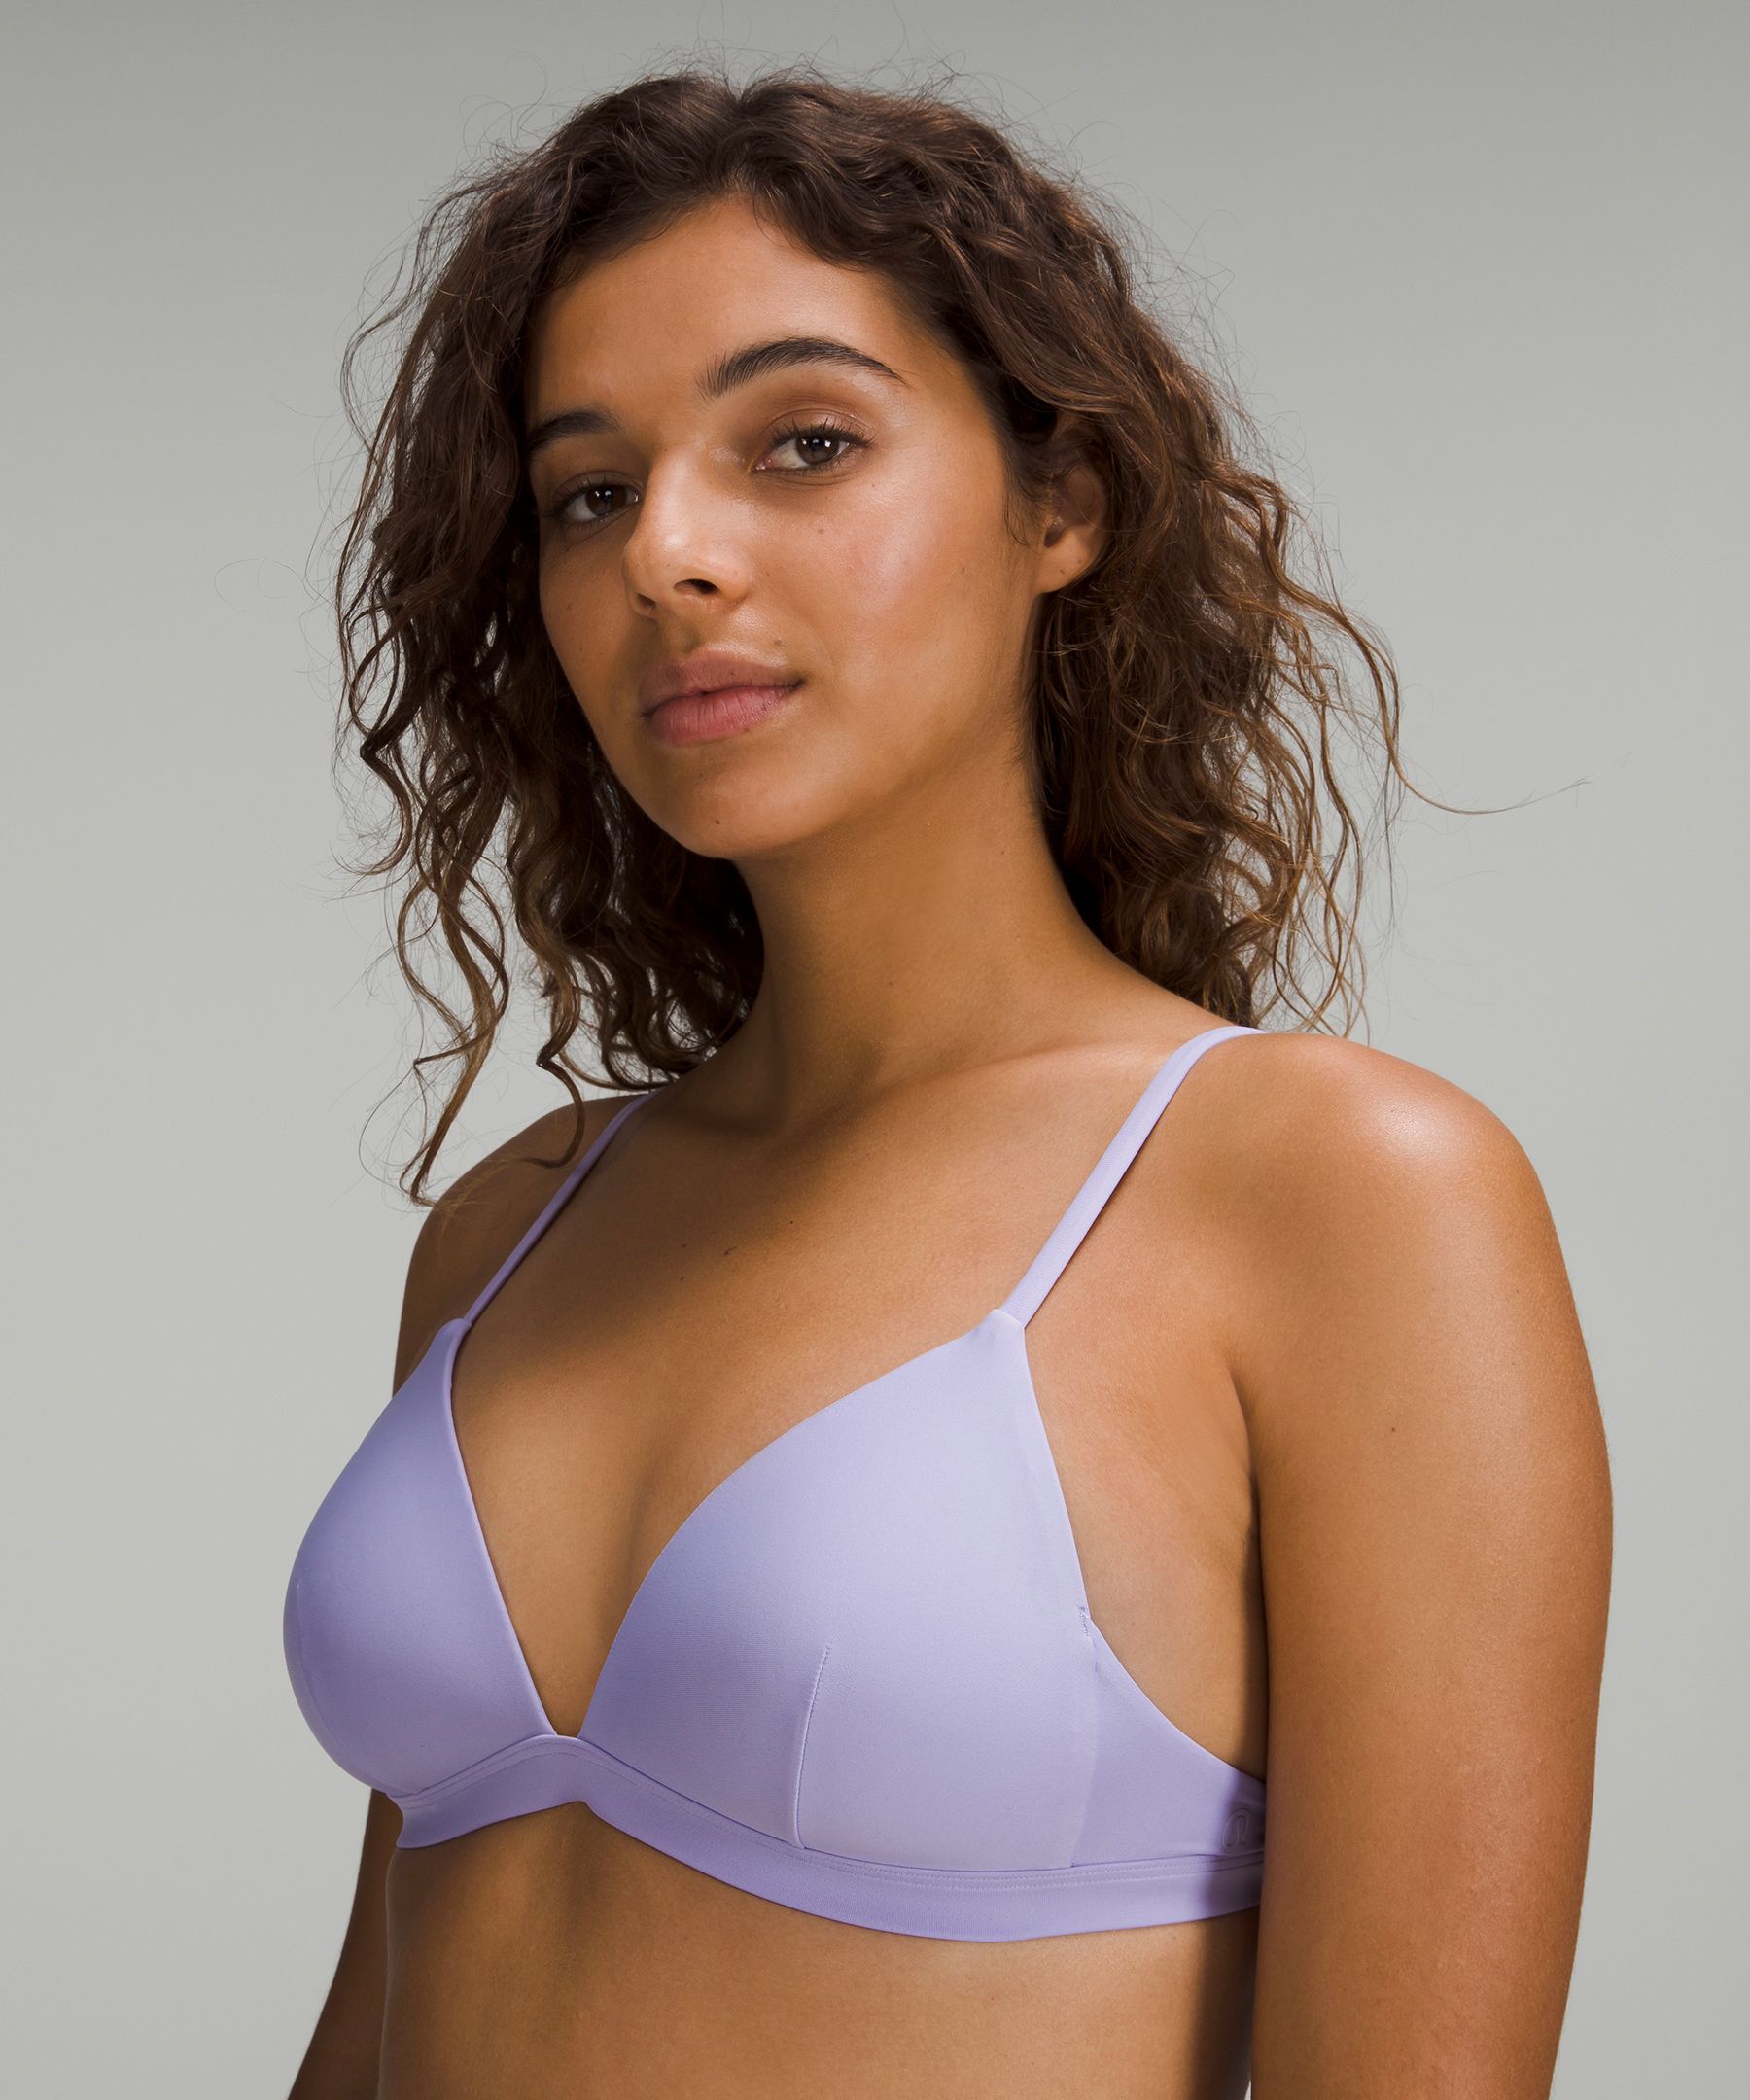 A Bikini For Big Boobs: Lululemon Waterside Swim Top *D Cup, 11 Lululemon  Swimsuits You Can Be Active In